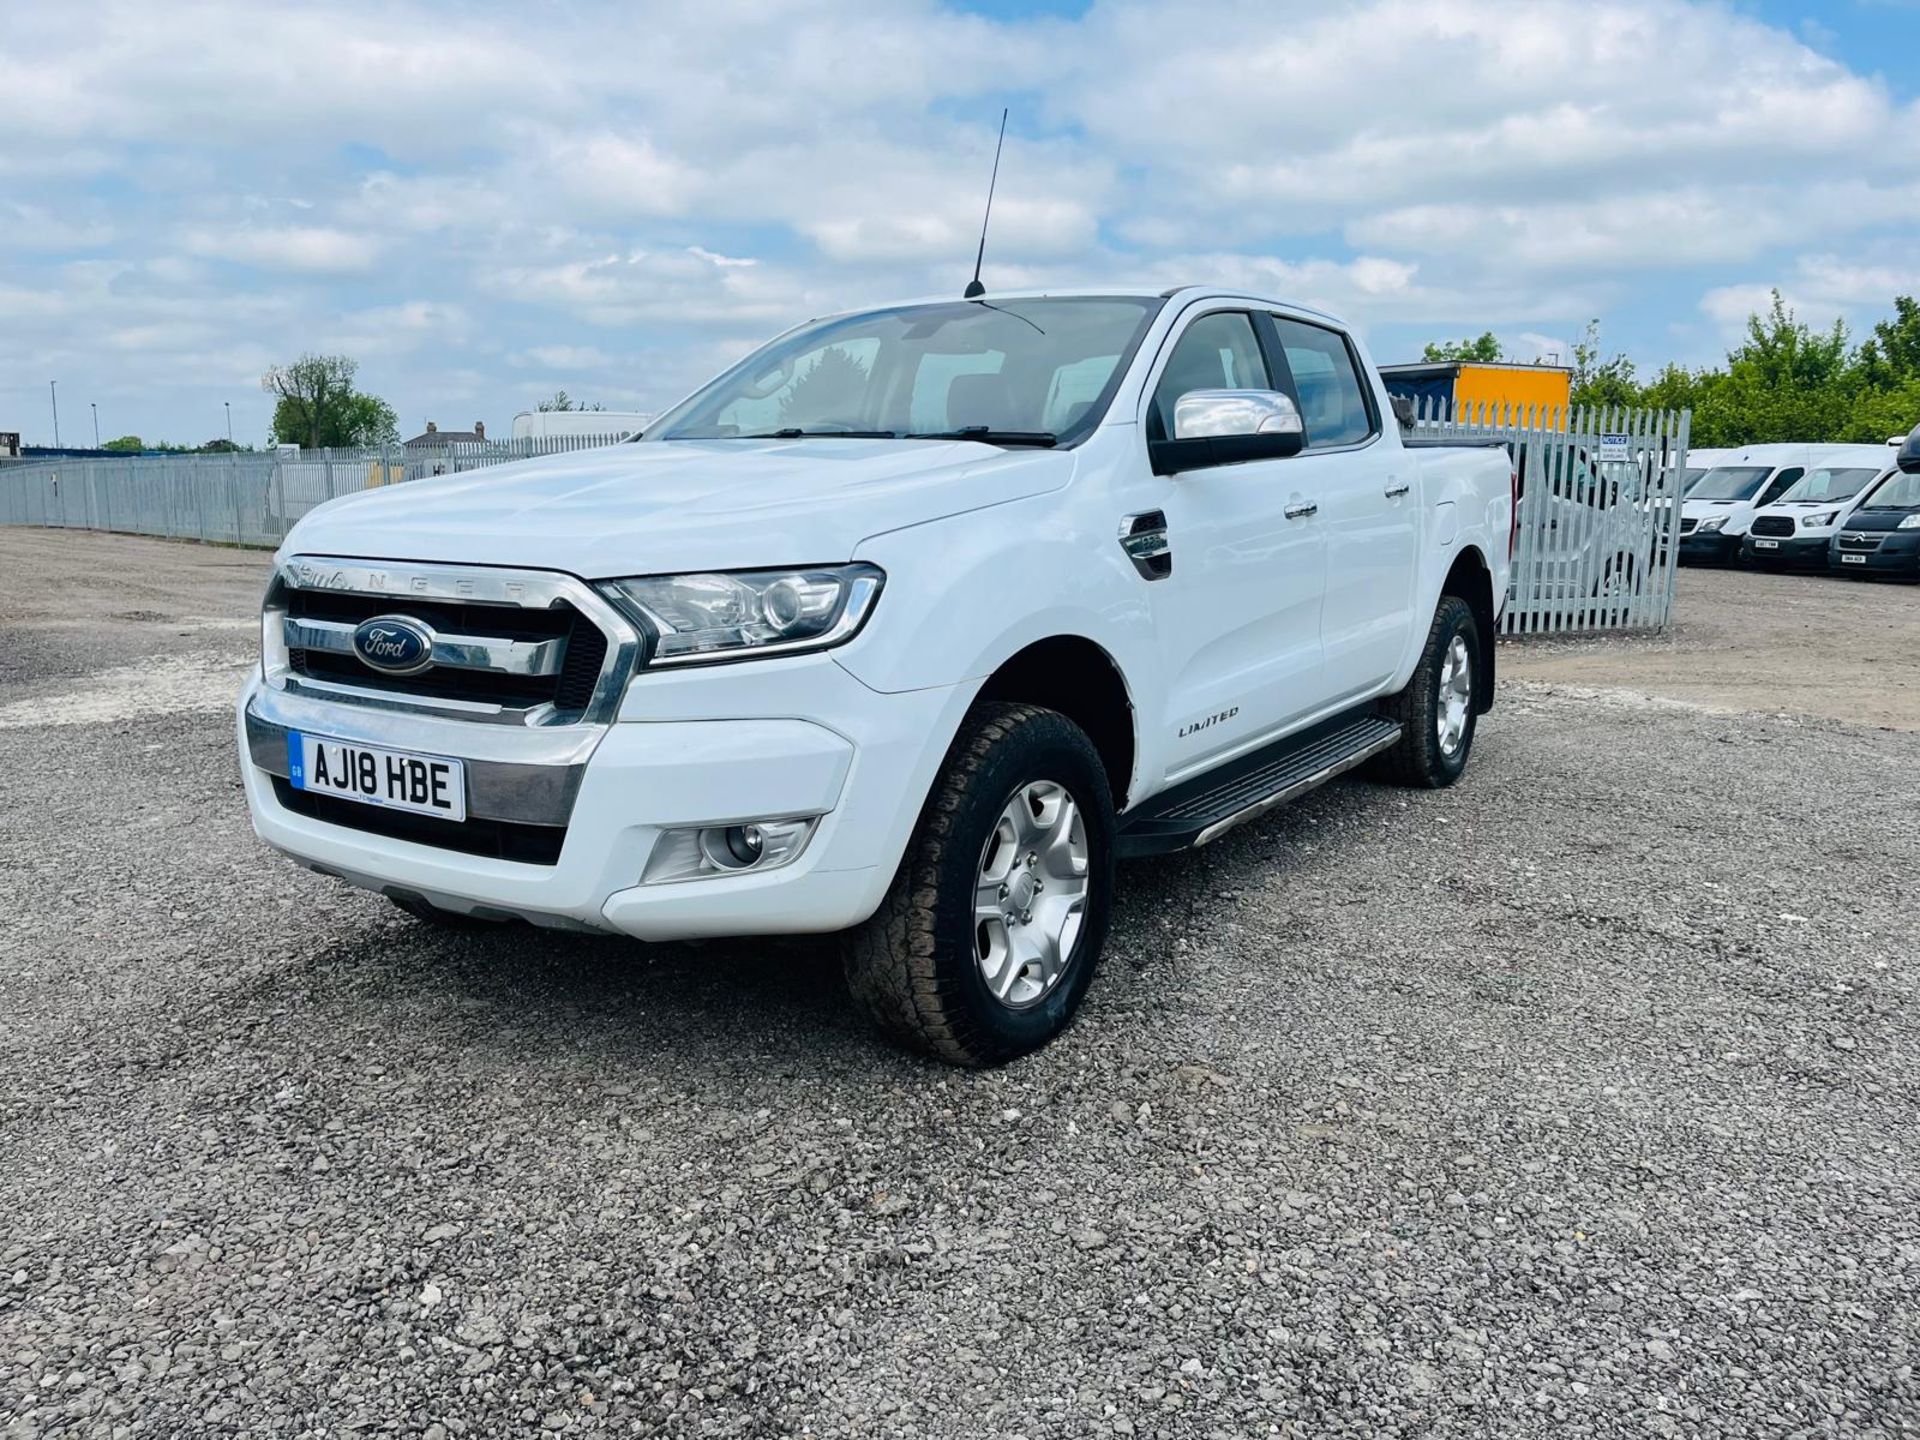 ** ON SALE ** Ford Ranger Limited 2.2 TDCI 4WD 2018 '18 Reg' -Automatic- ULEZ Compliant -A/C - Image 3 of 31